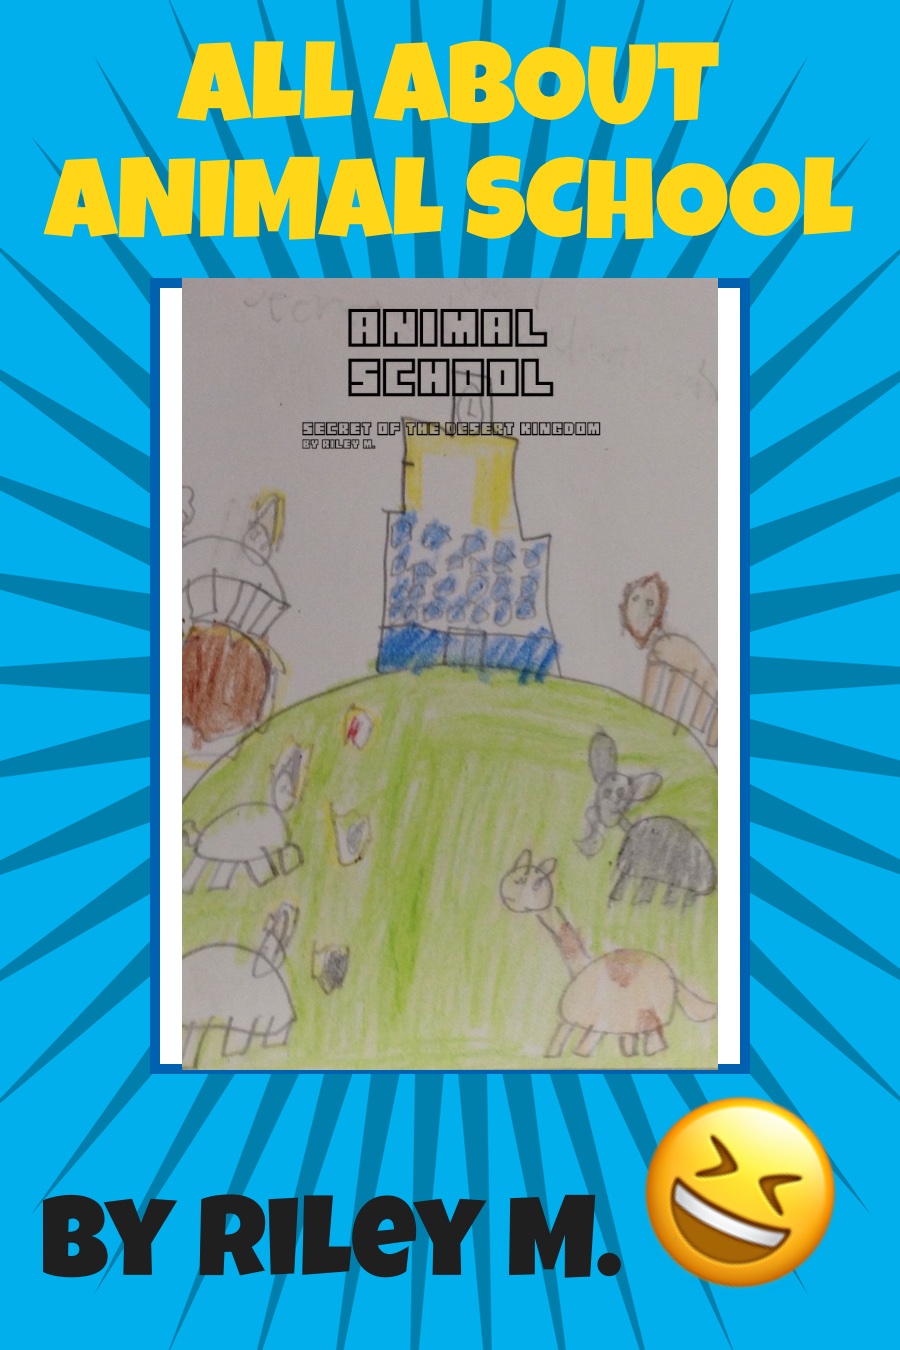 All About Animal School Secret of the Desert Kingdom by Riley M